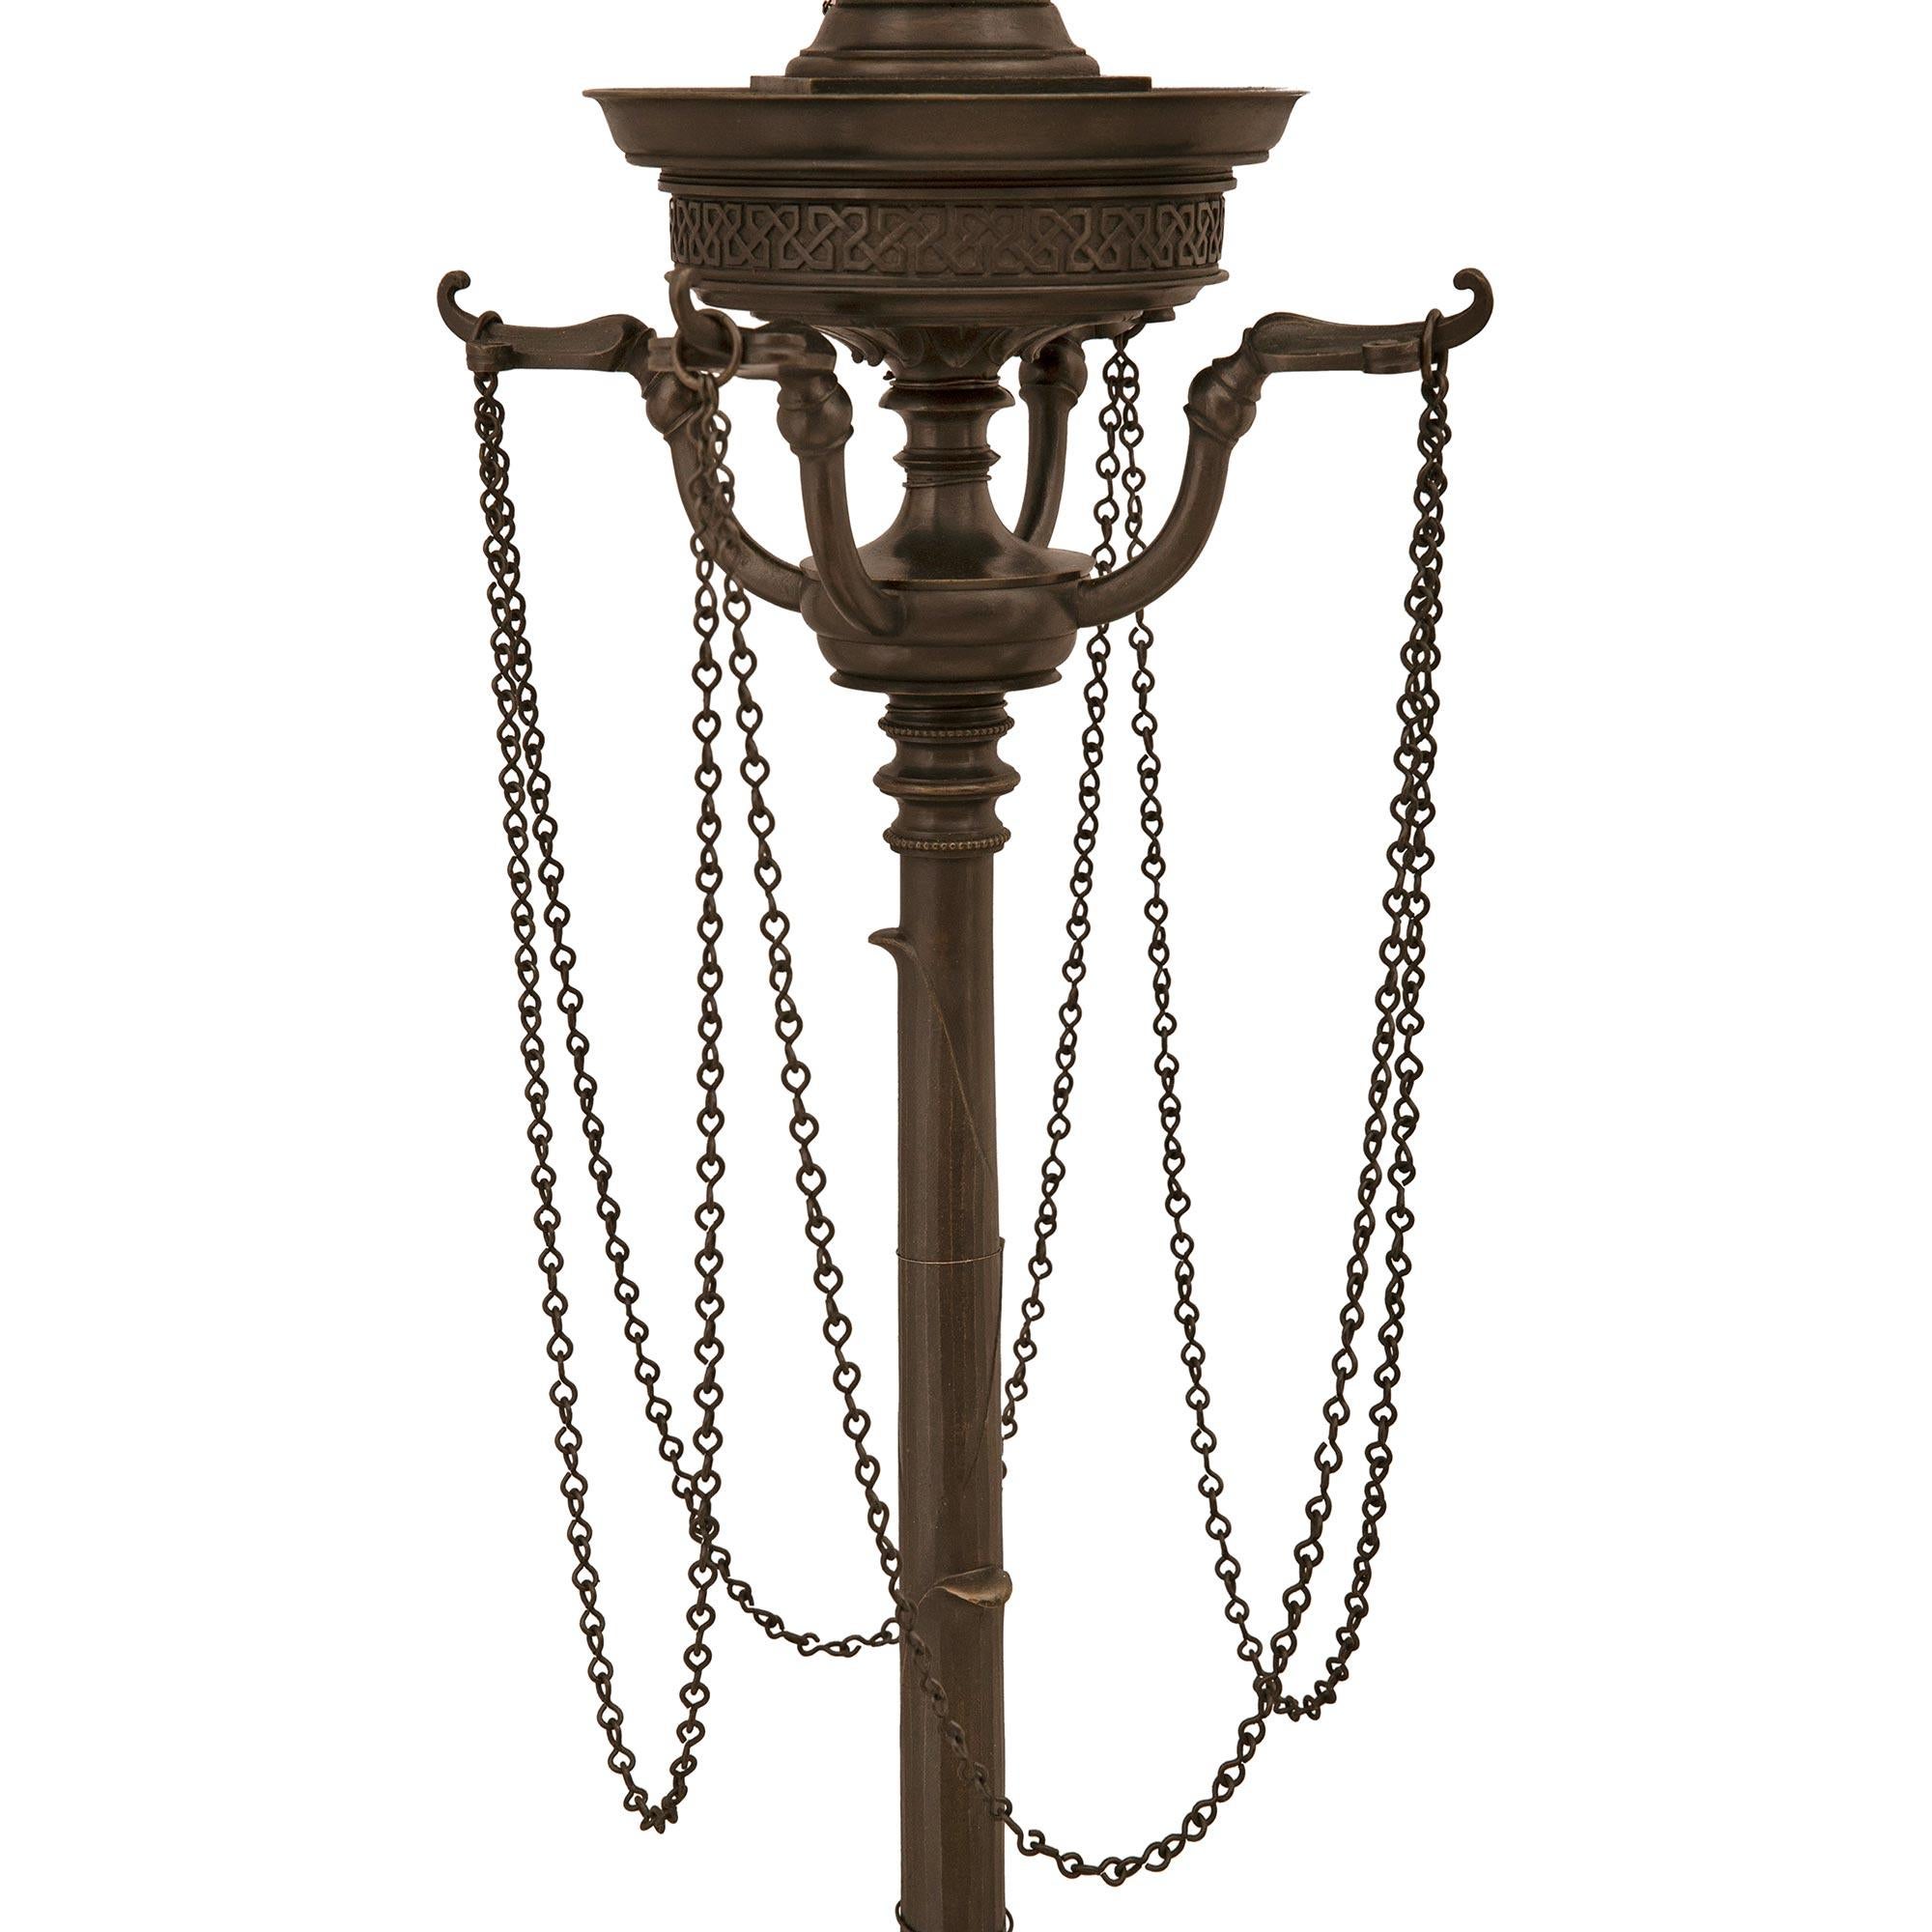 French Mid-19th Century Neoclassical Style Solid Bronze and Ormolu Floor Lamp For Sale 1